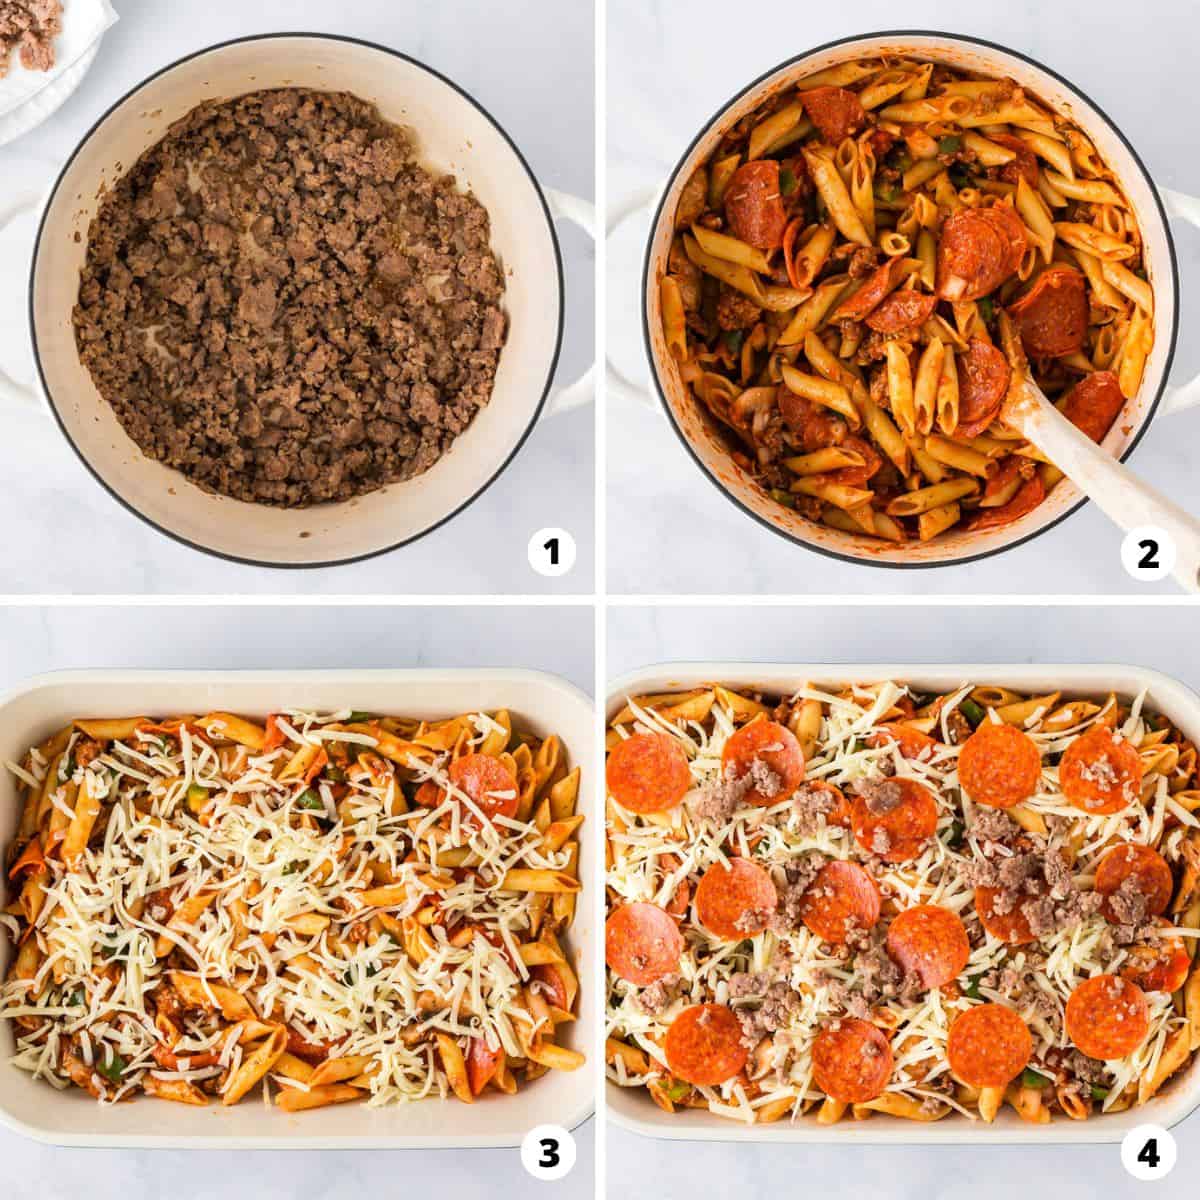 Showing how to make pizza casserole in a 4 step collage. 